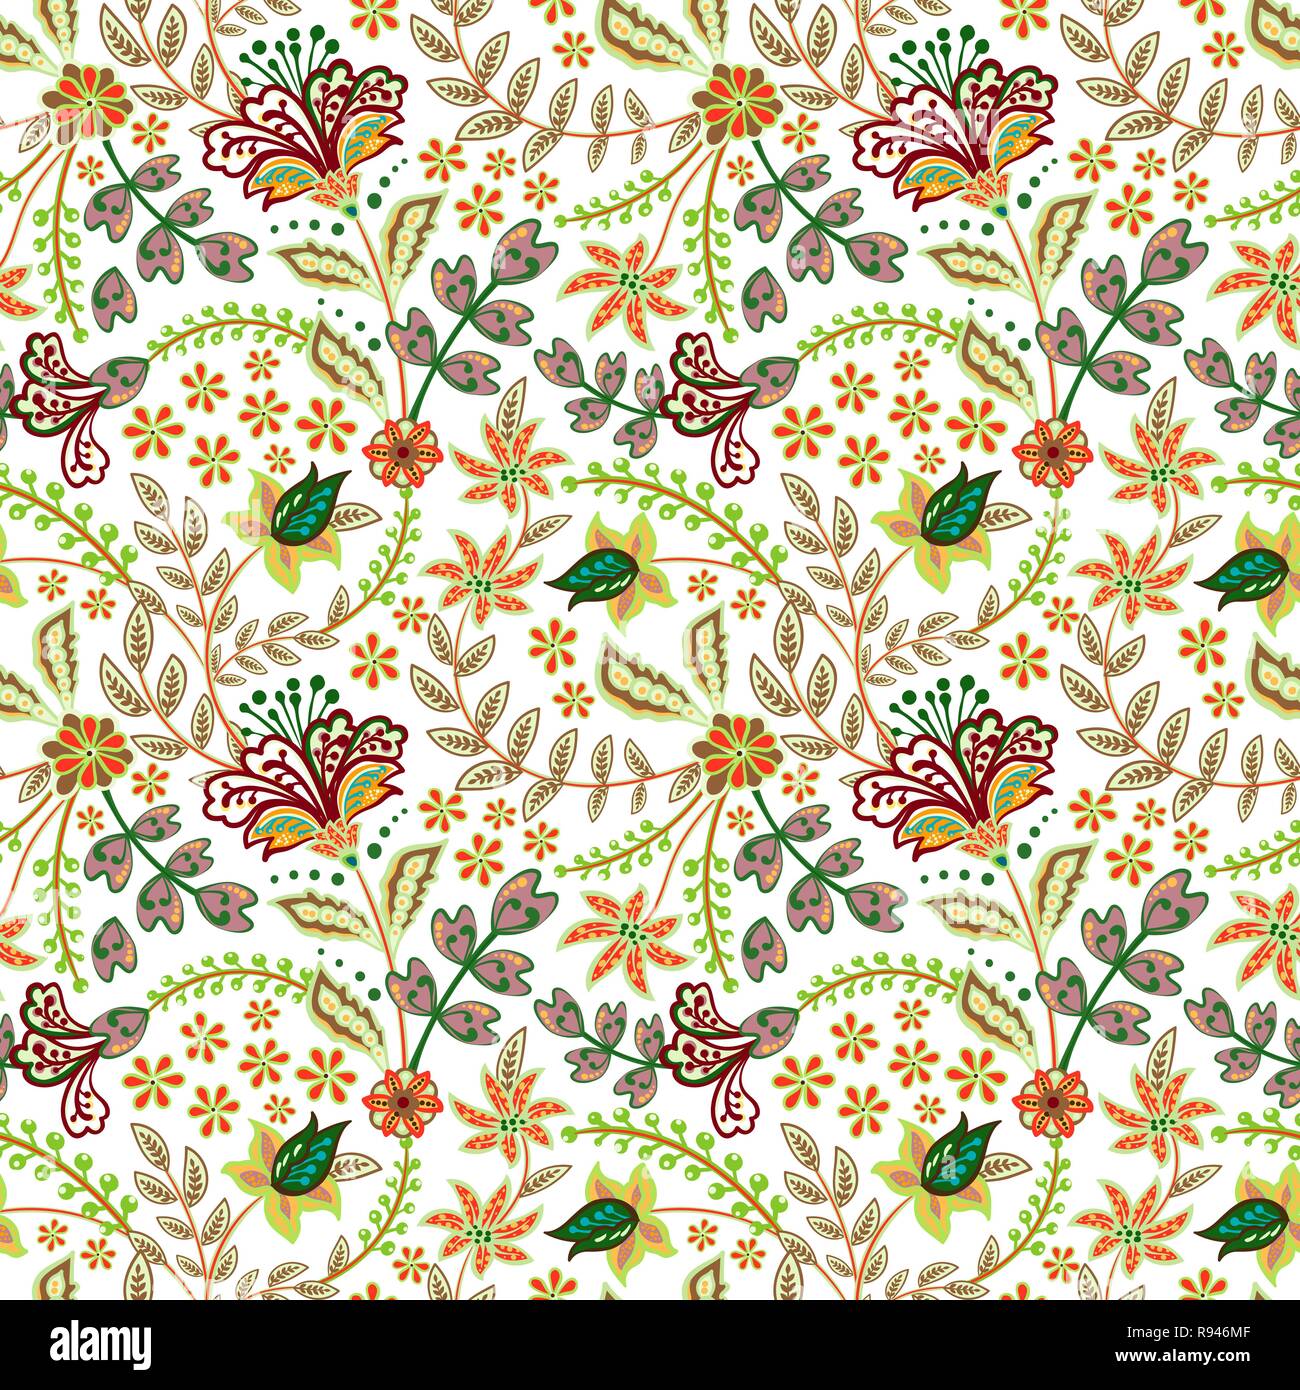 Retro wild flower pattern in the many kind of florals. Botanical Motifs scattered random. Seamless vector texture. For fashion prints. Printing with in hand drawn style on white background. Stock Vector